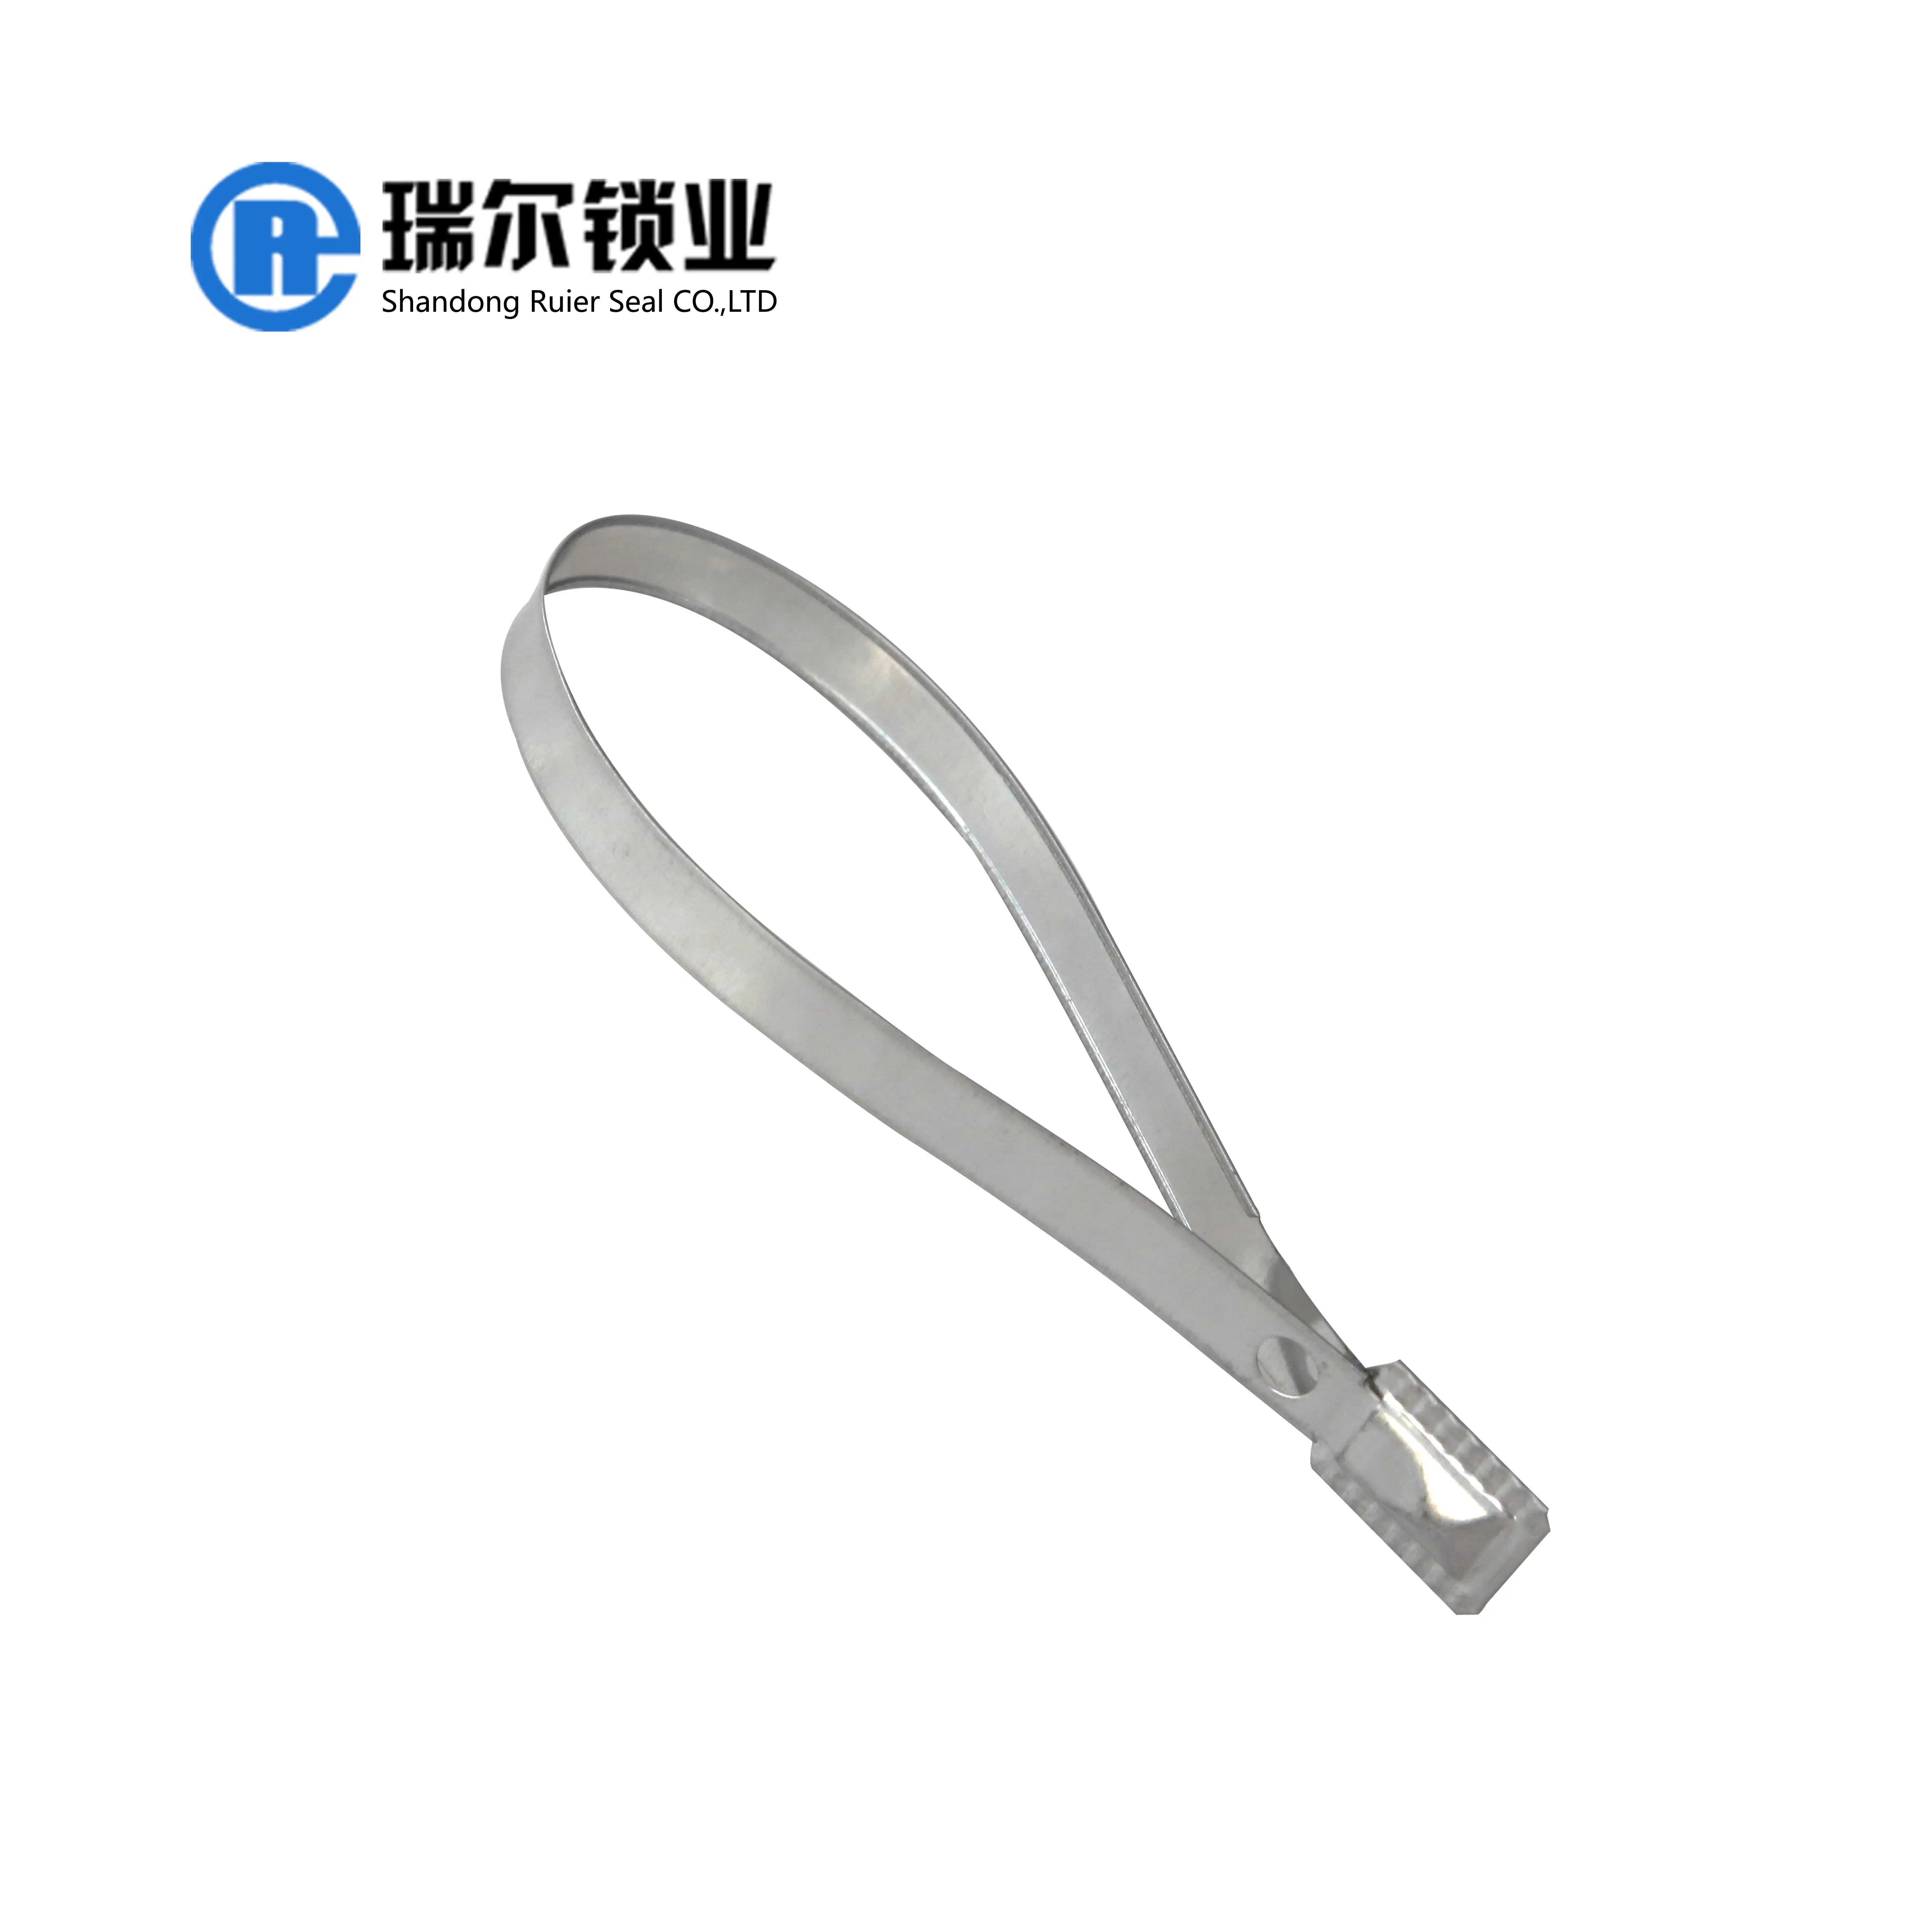 Plate security metal strap seals for the electric power meter RES004